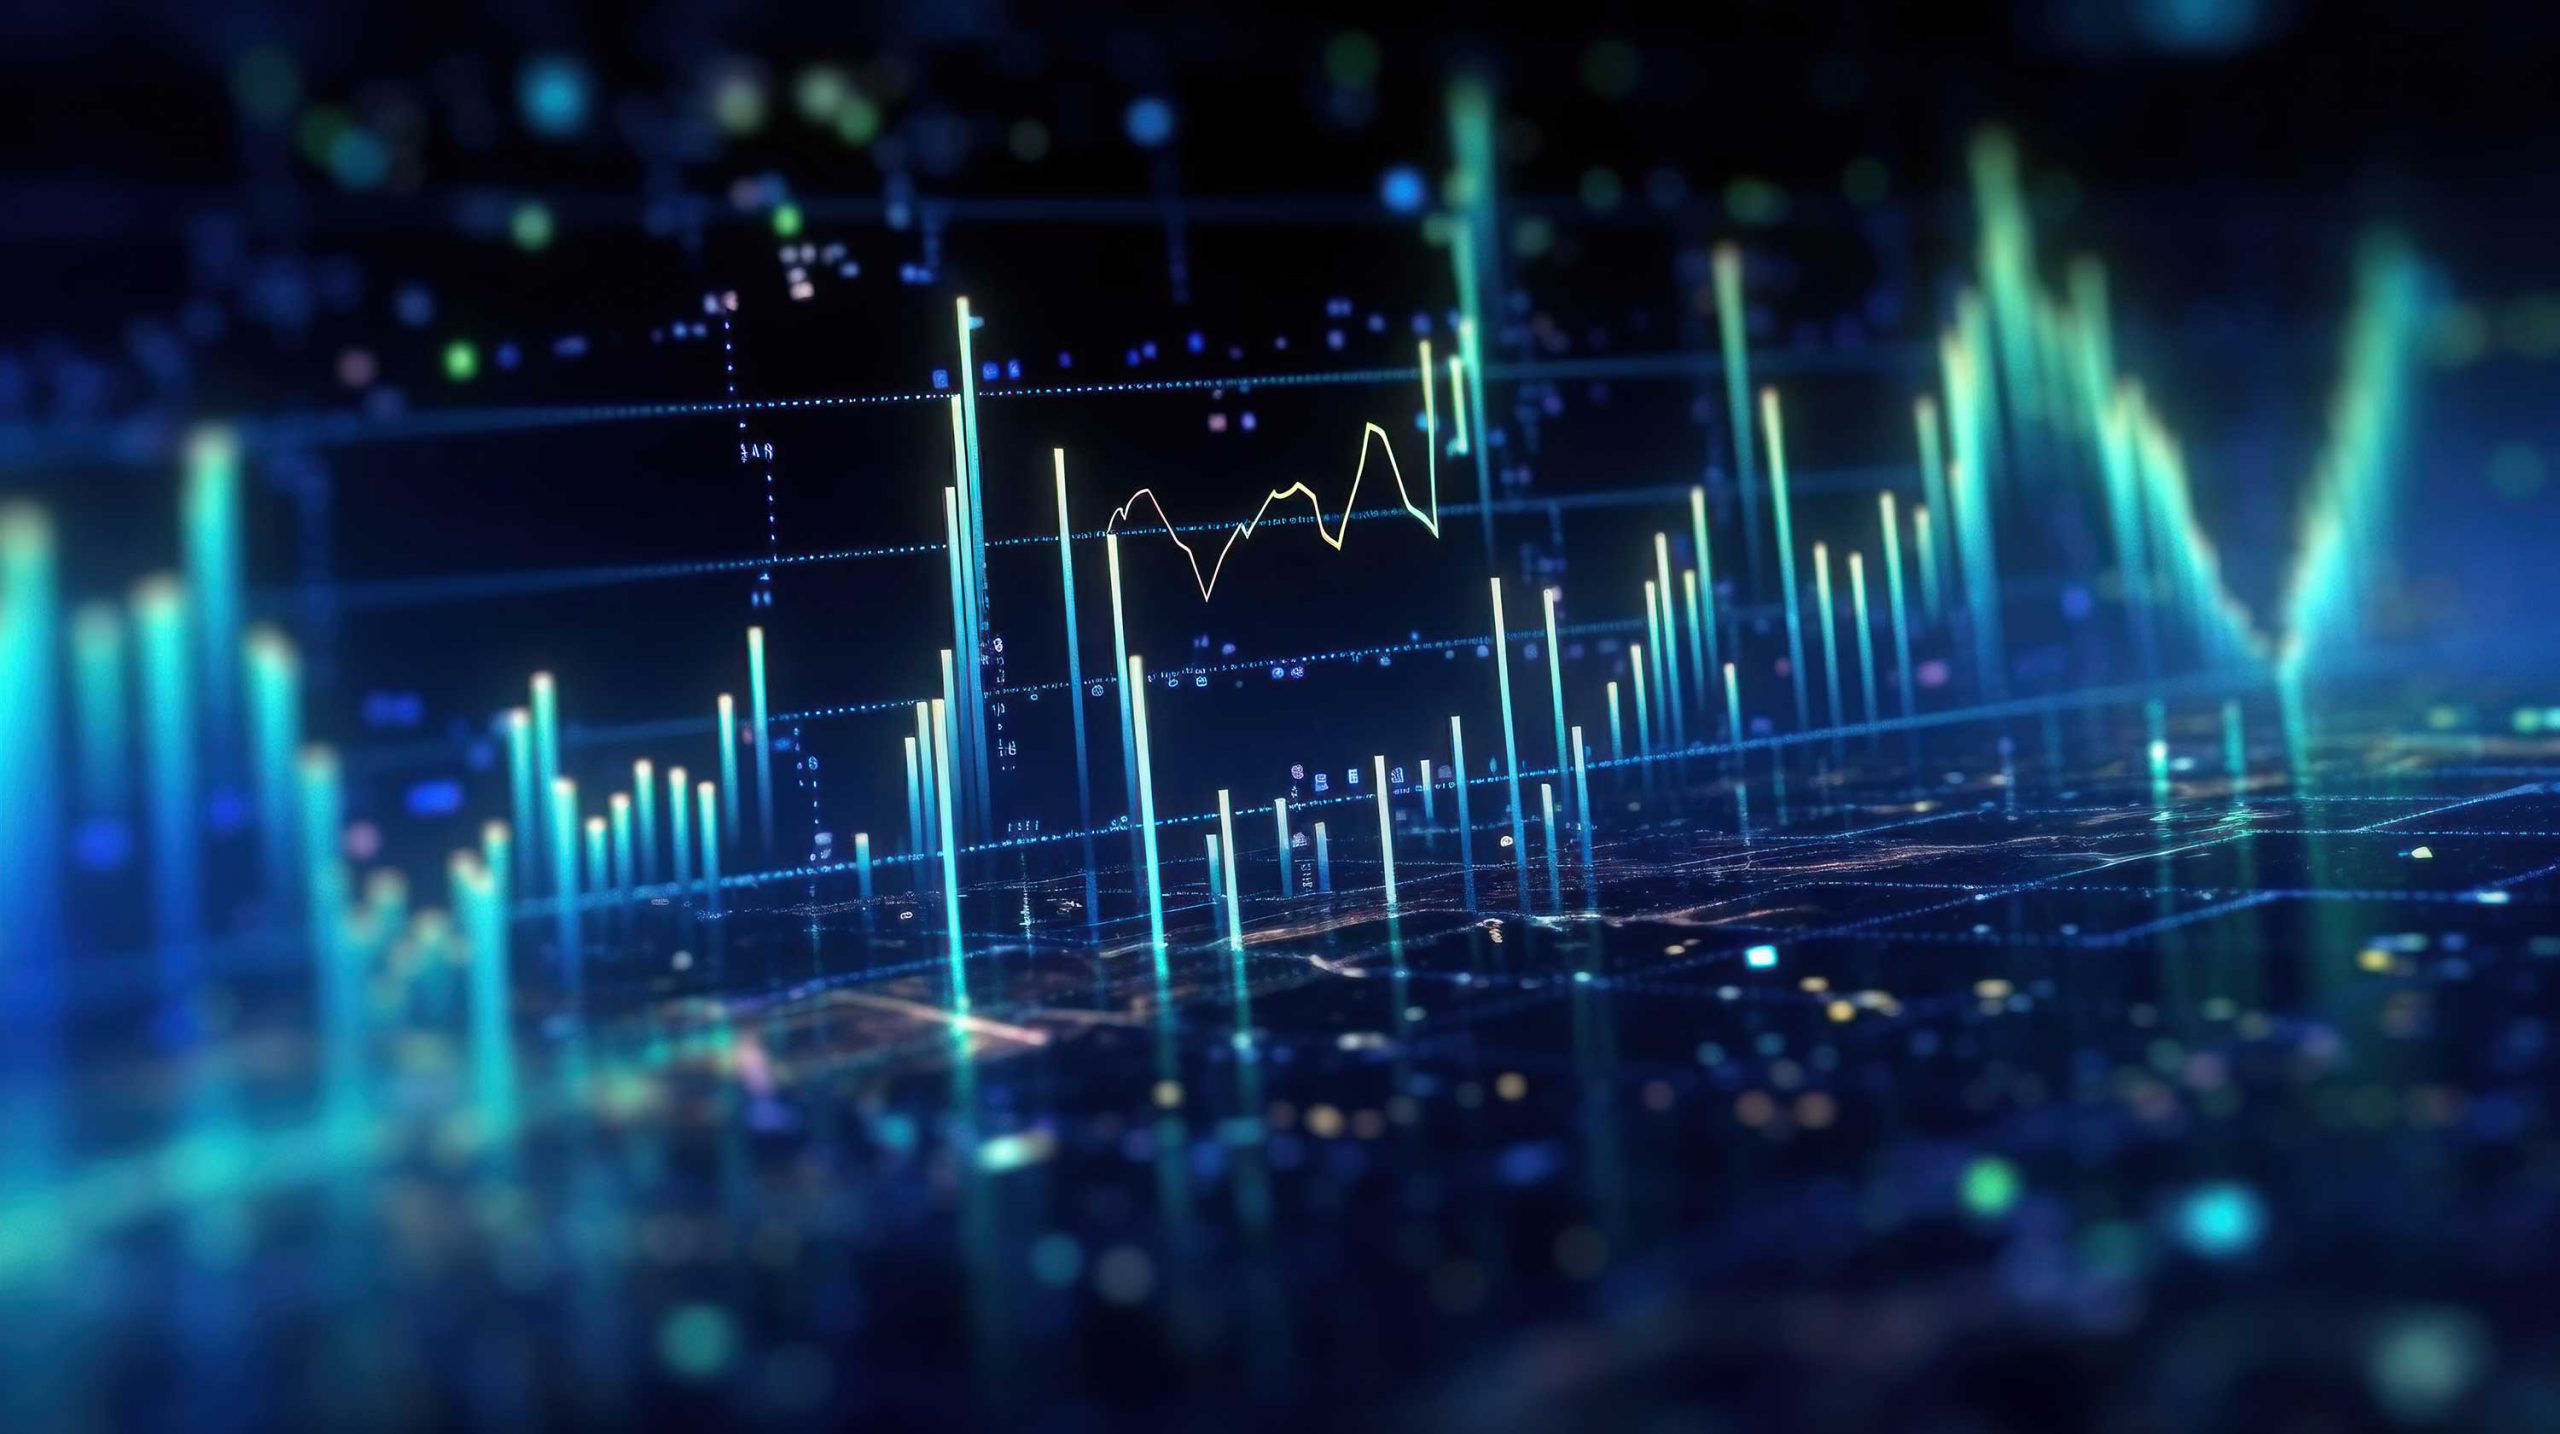 Illustration with cool colors showing financial charts